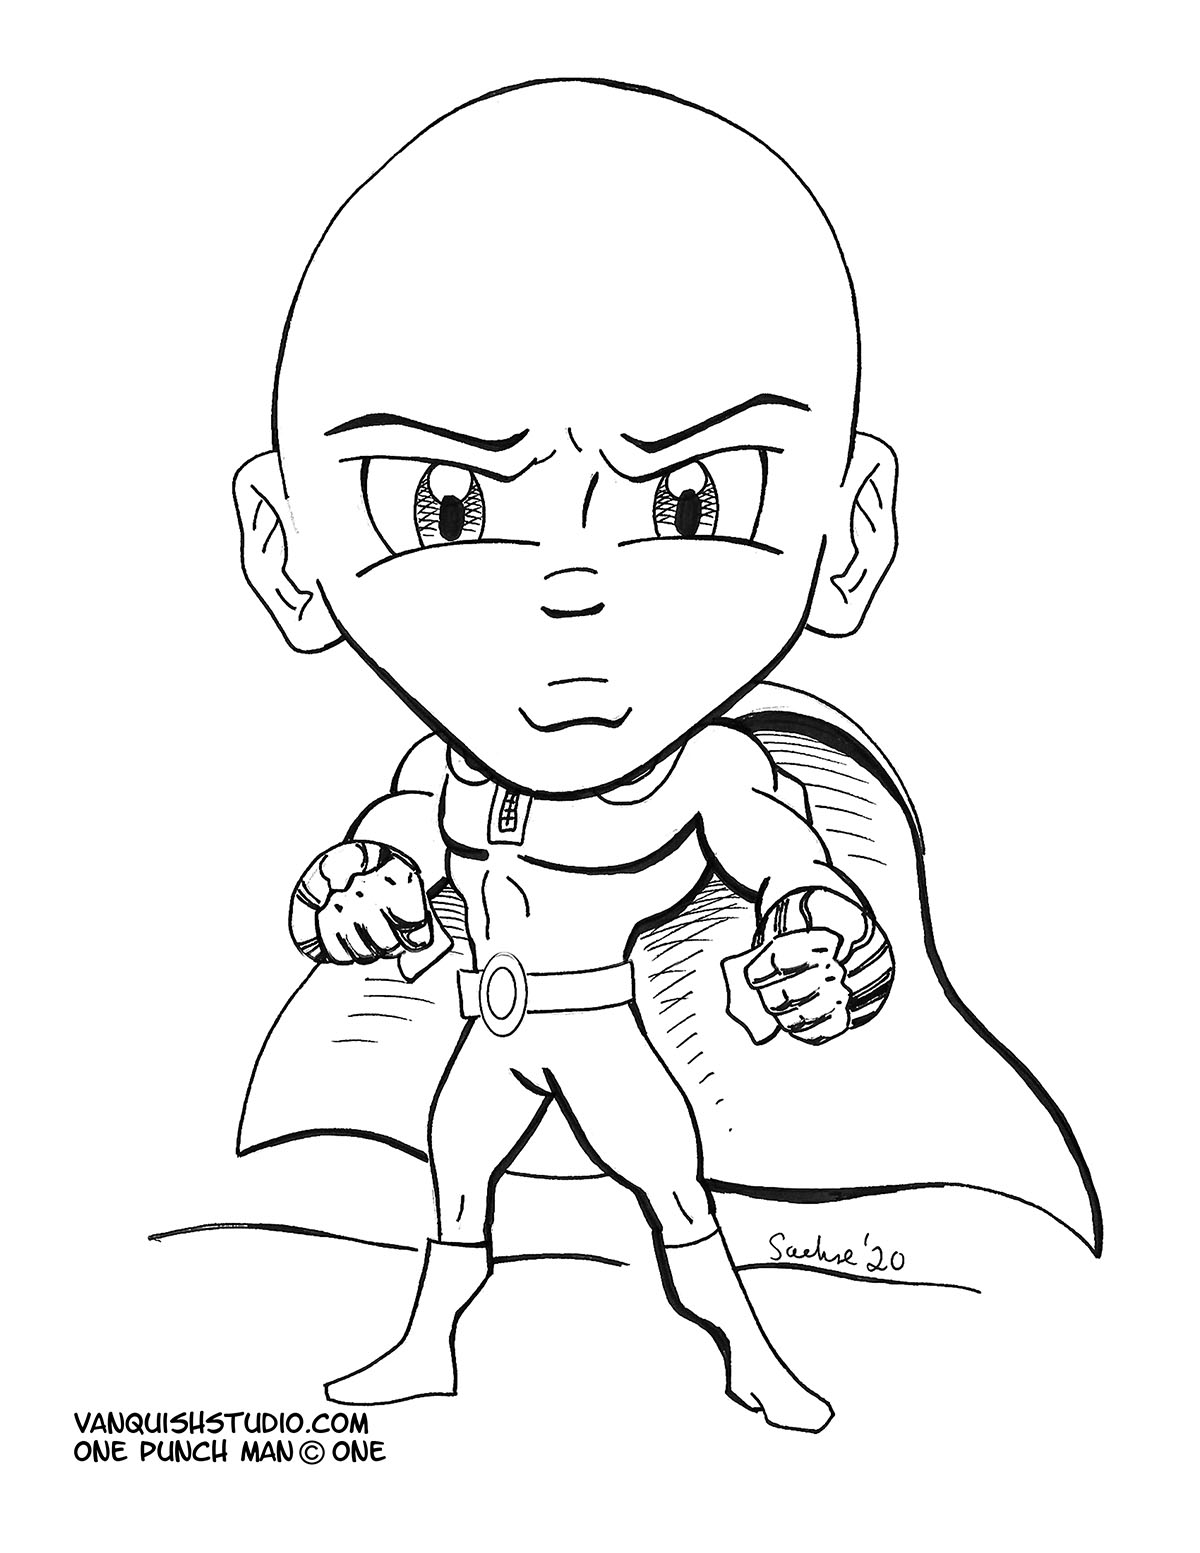 New Coloring Page – One Punch Man | Vanquish Studio